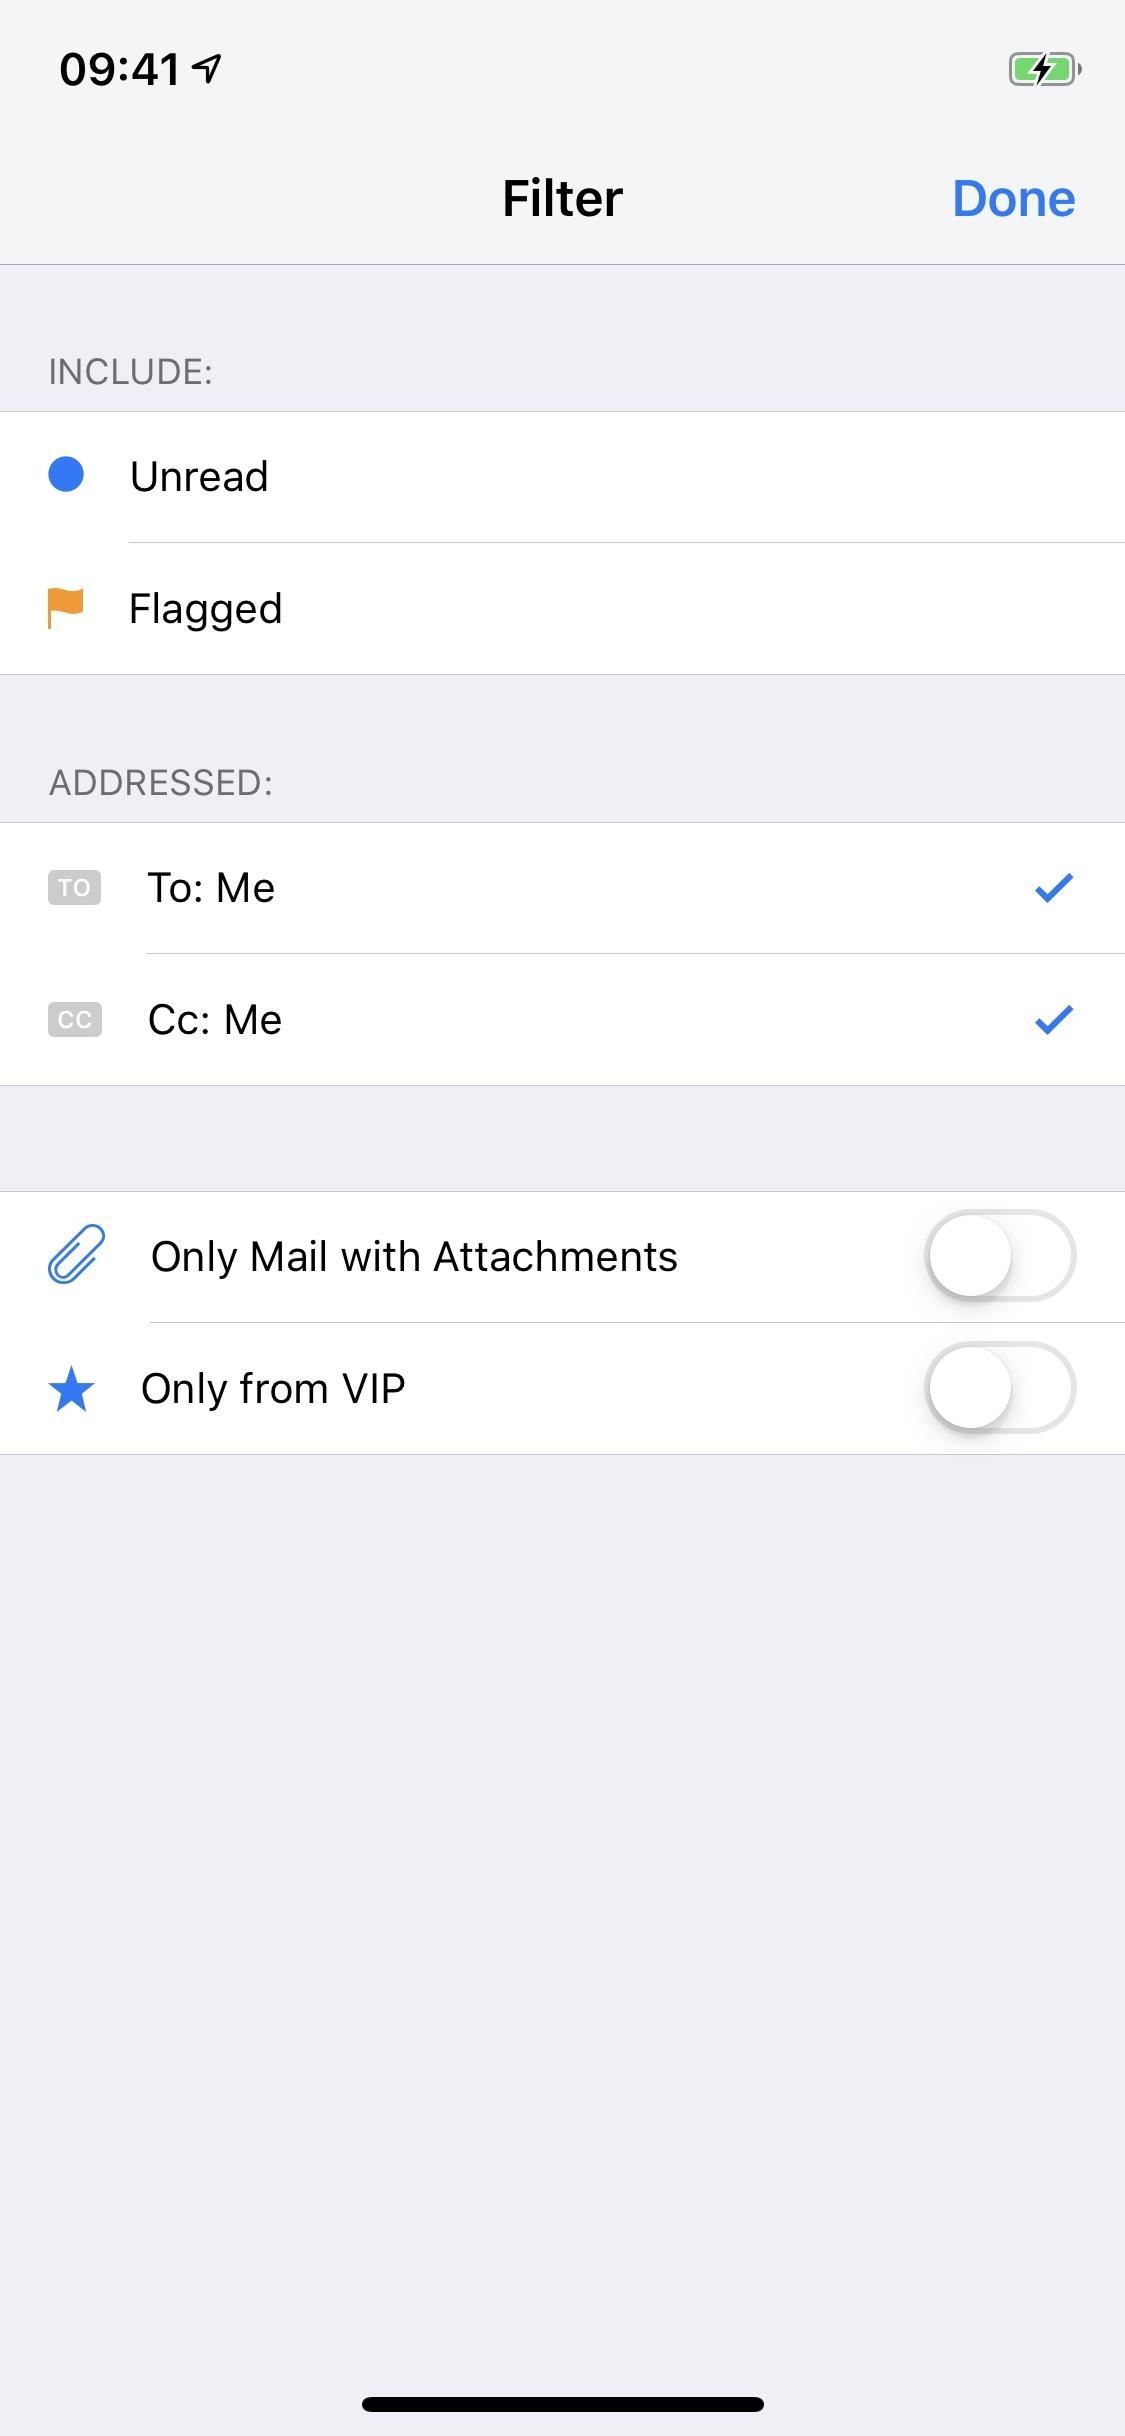 How to Delete Emails in Bulk from Your iPhone's Mail App